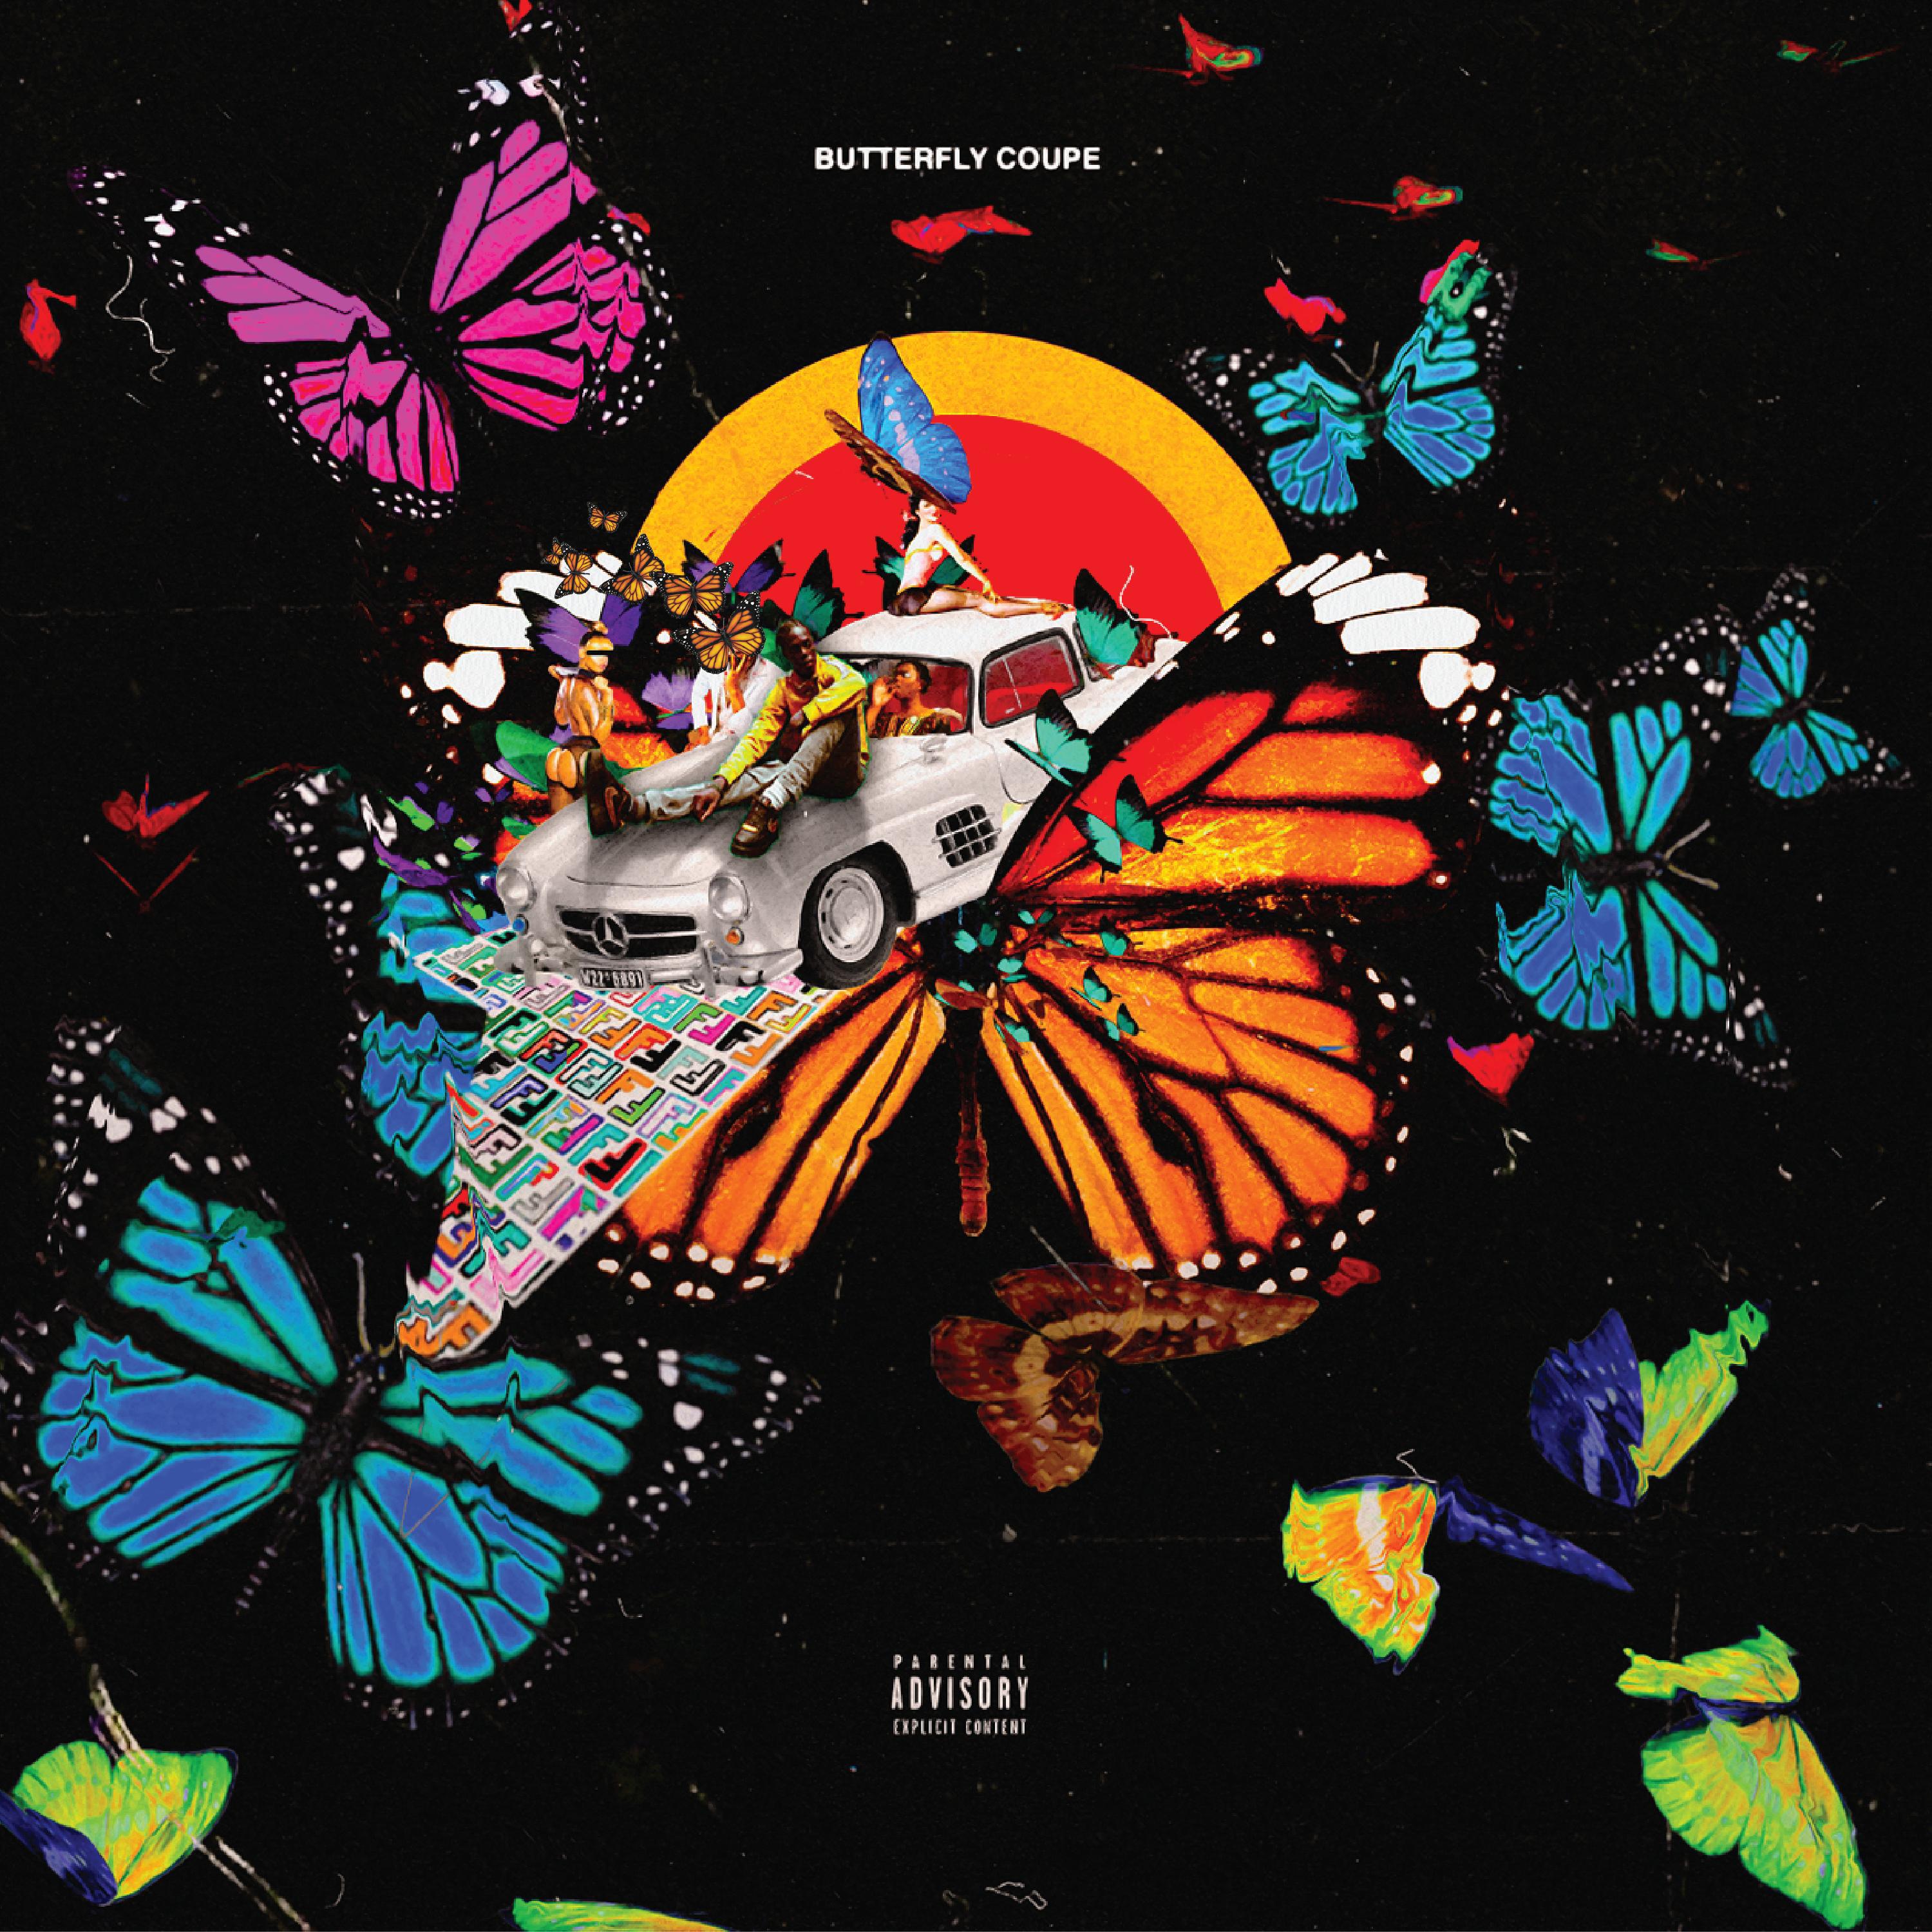 Butterfly Coupe Feat. Yung Bans, Cash Carti